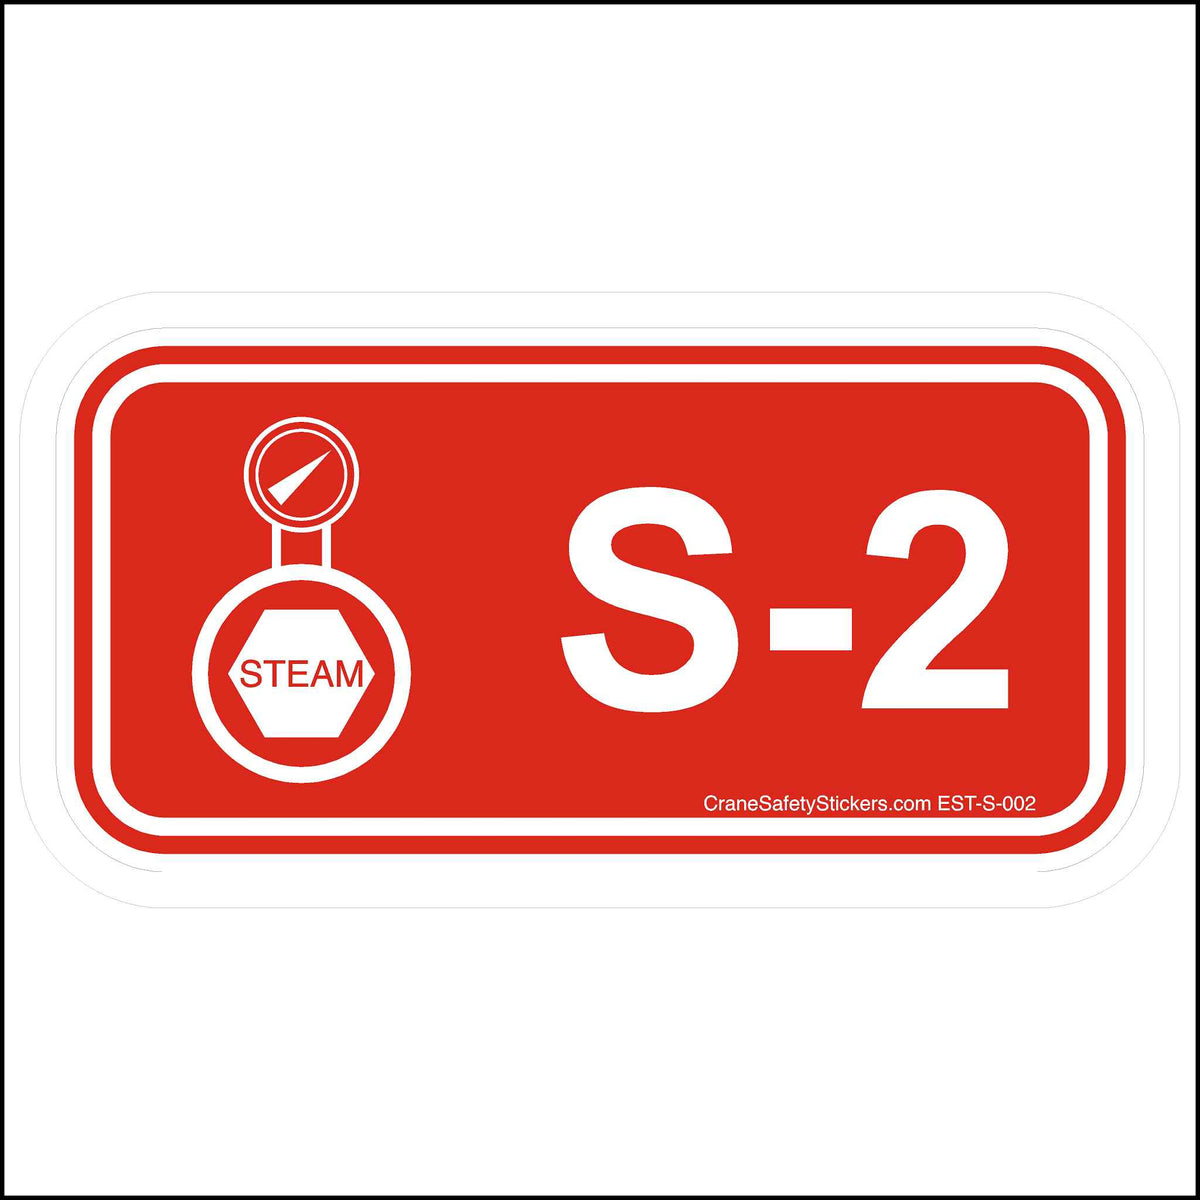 Energy Control Program Steam Disconnect Stickers S-2.